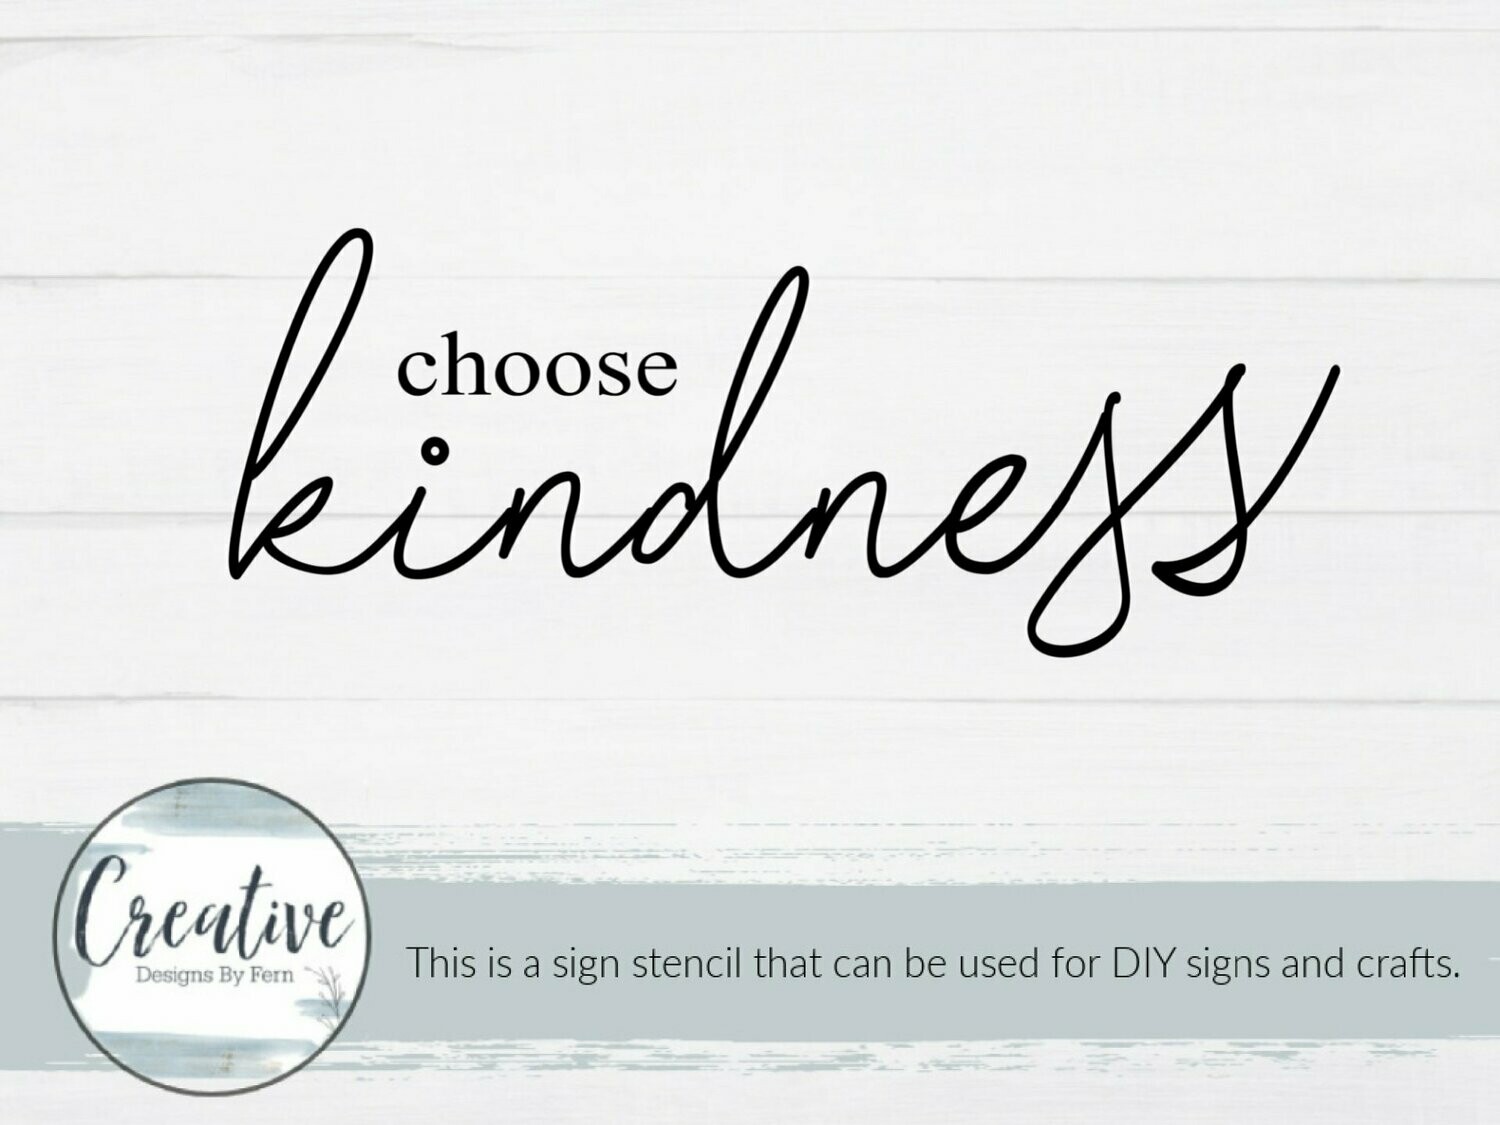 Choose Kindness and Clothe Yourself Bundle Sign Stencil, Stencil or Decal: Sign Stencil, Size: 8.5" x 20" & 14" x 14" bundle